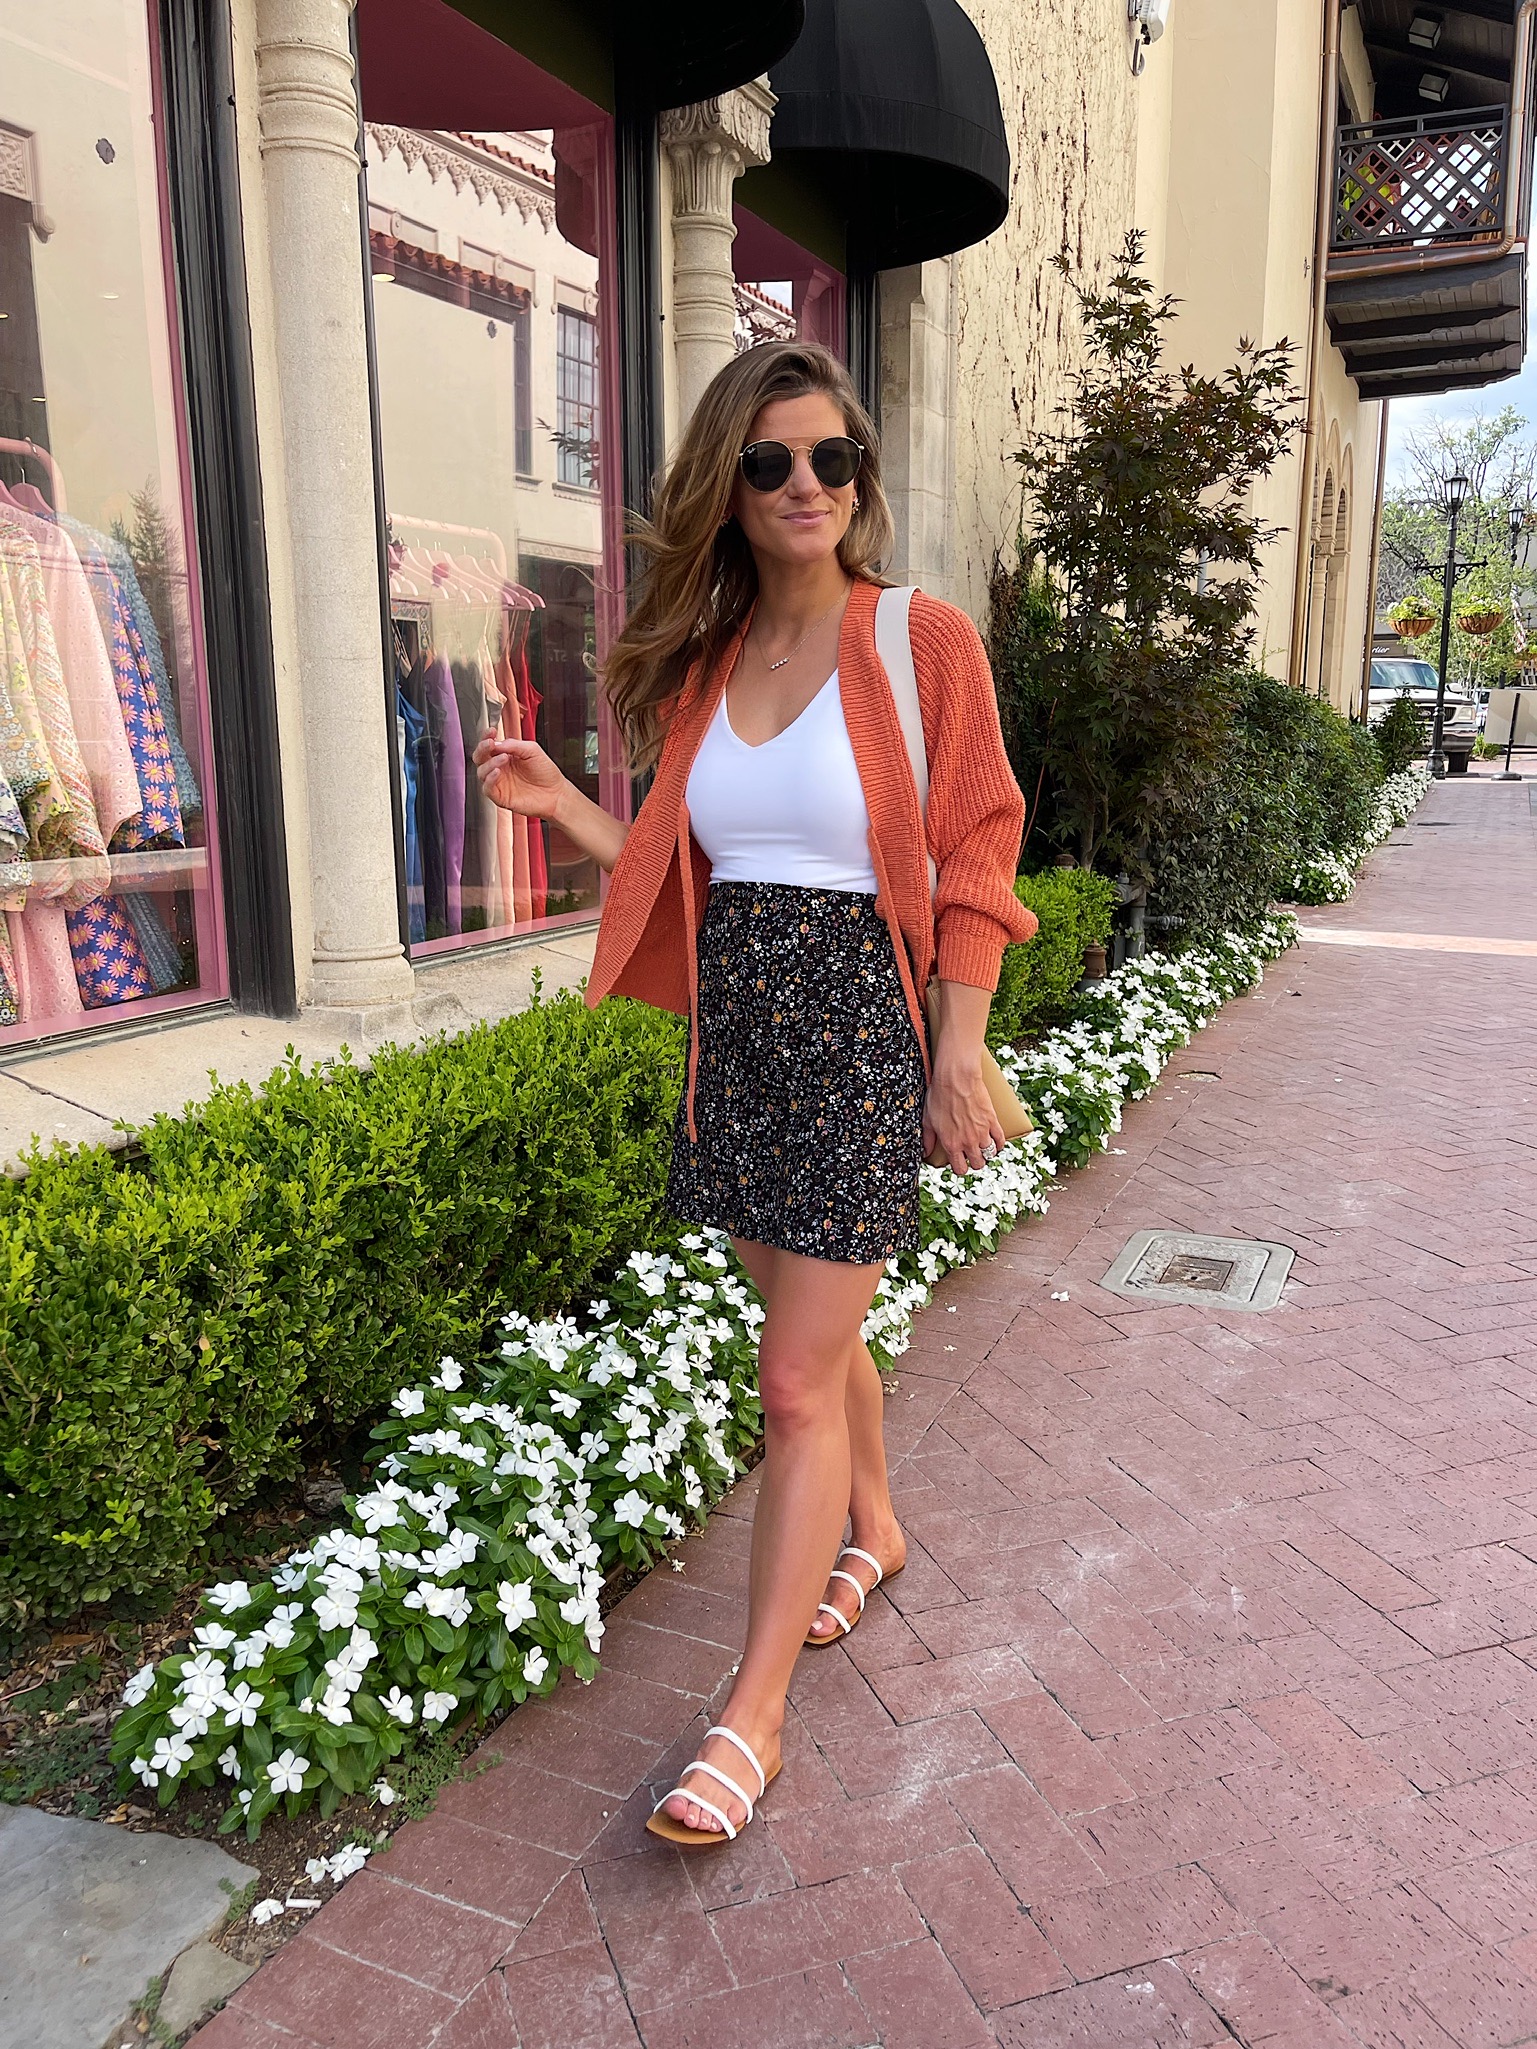 Brighton Butler wearing made well mini slip skirt in folkmagic floral, made well eastdale tie front cardigan sweater in orange, Abercrombie double layer seamless v neck bodysuit in white